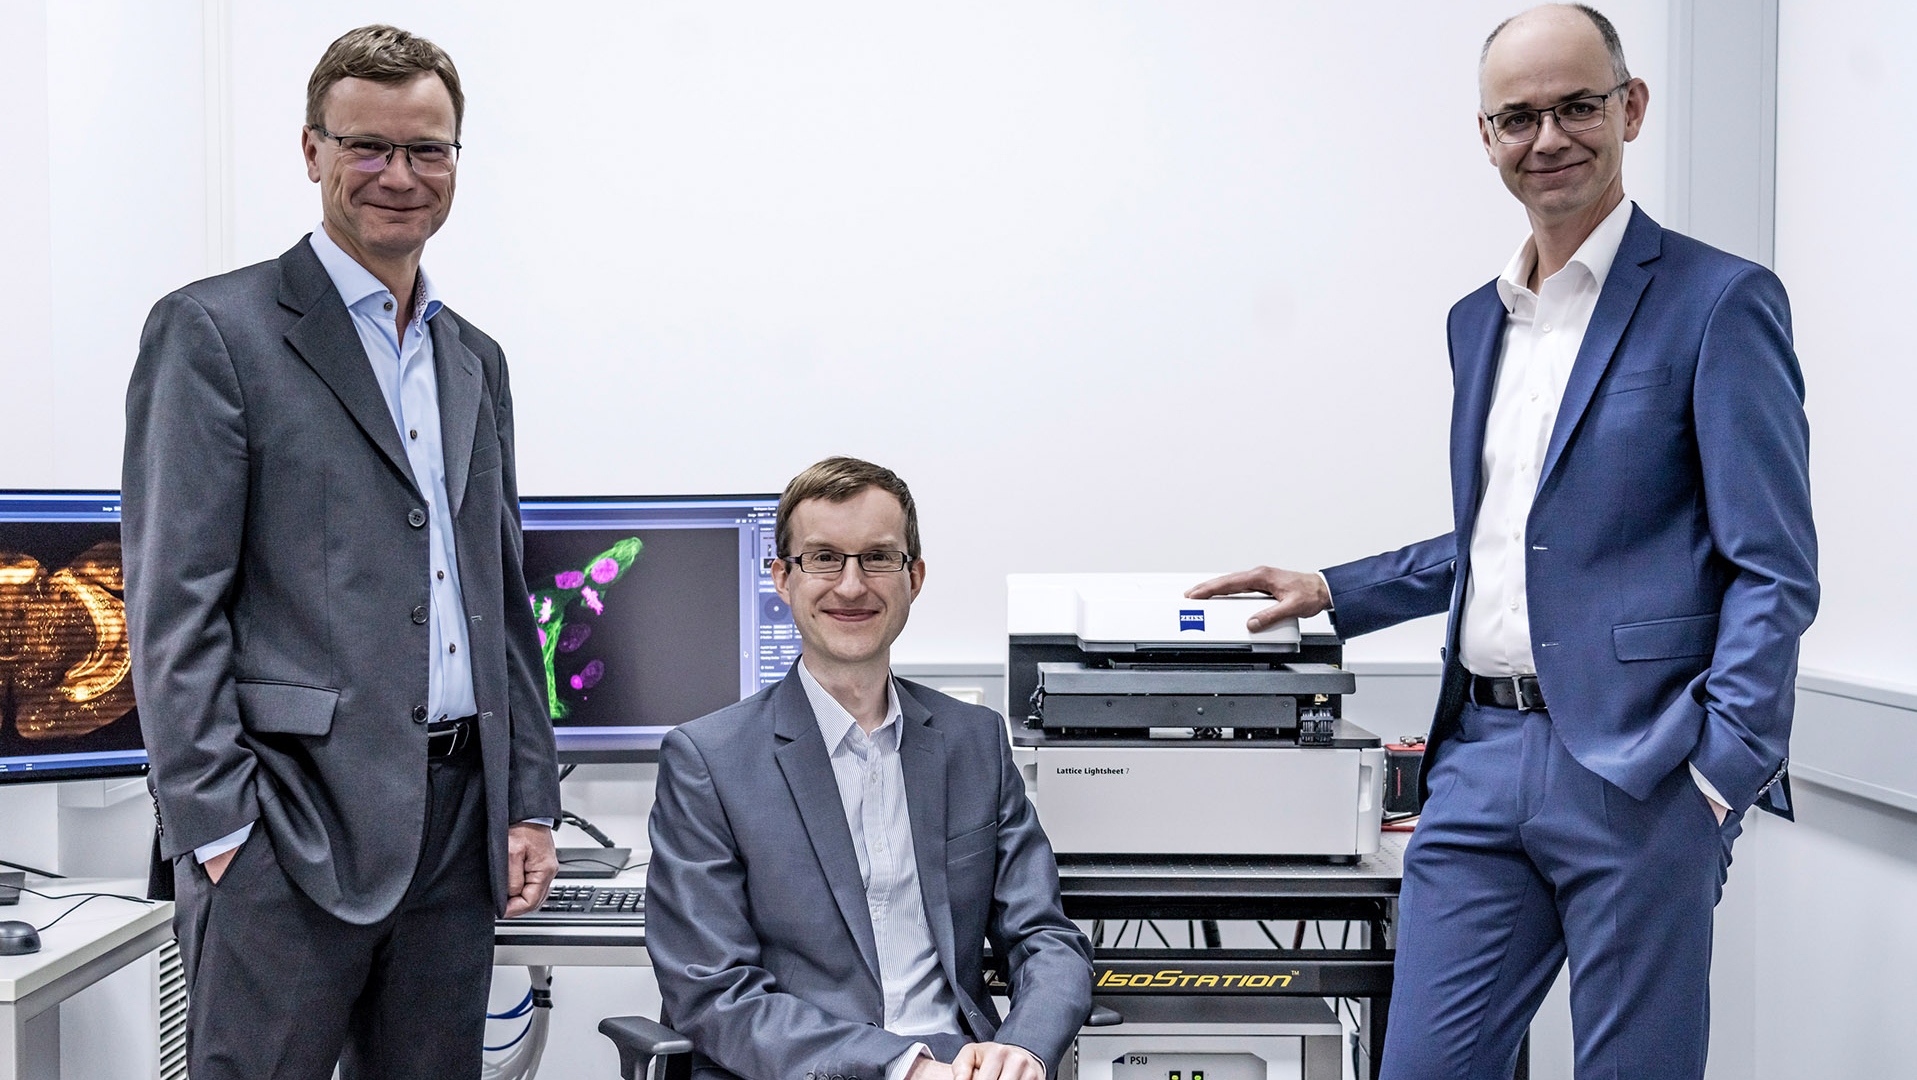 ZEISS microscope developers nominated for 2022 German Future Prize